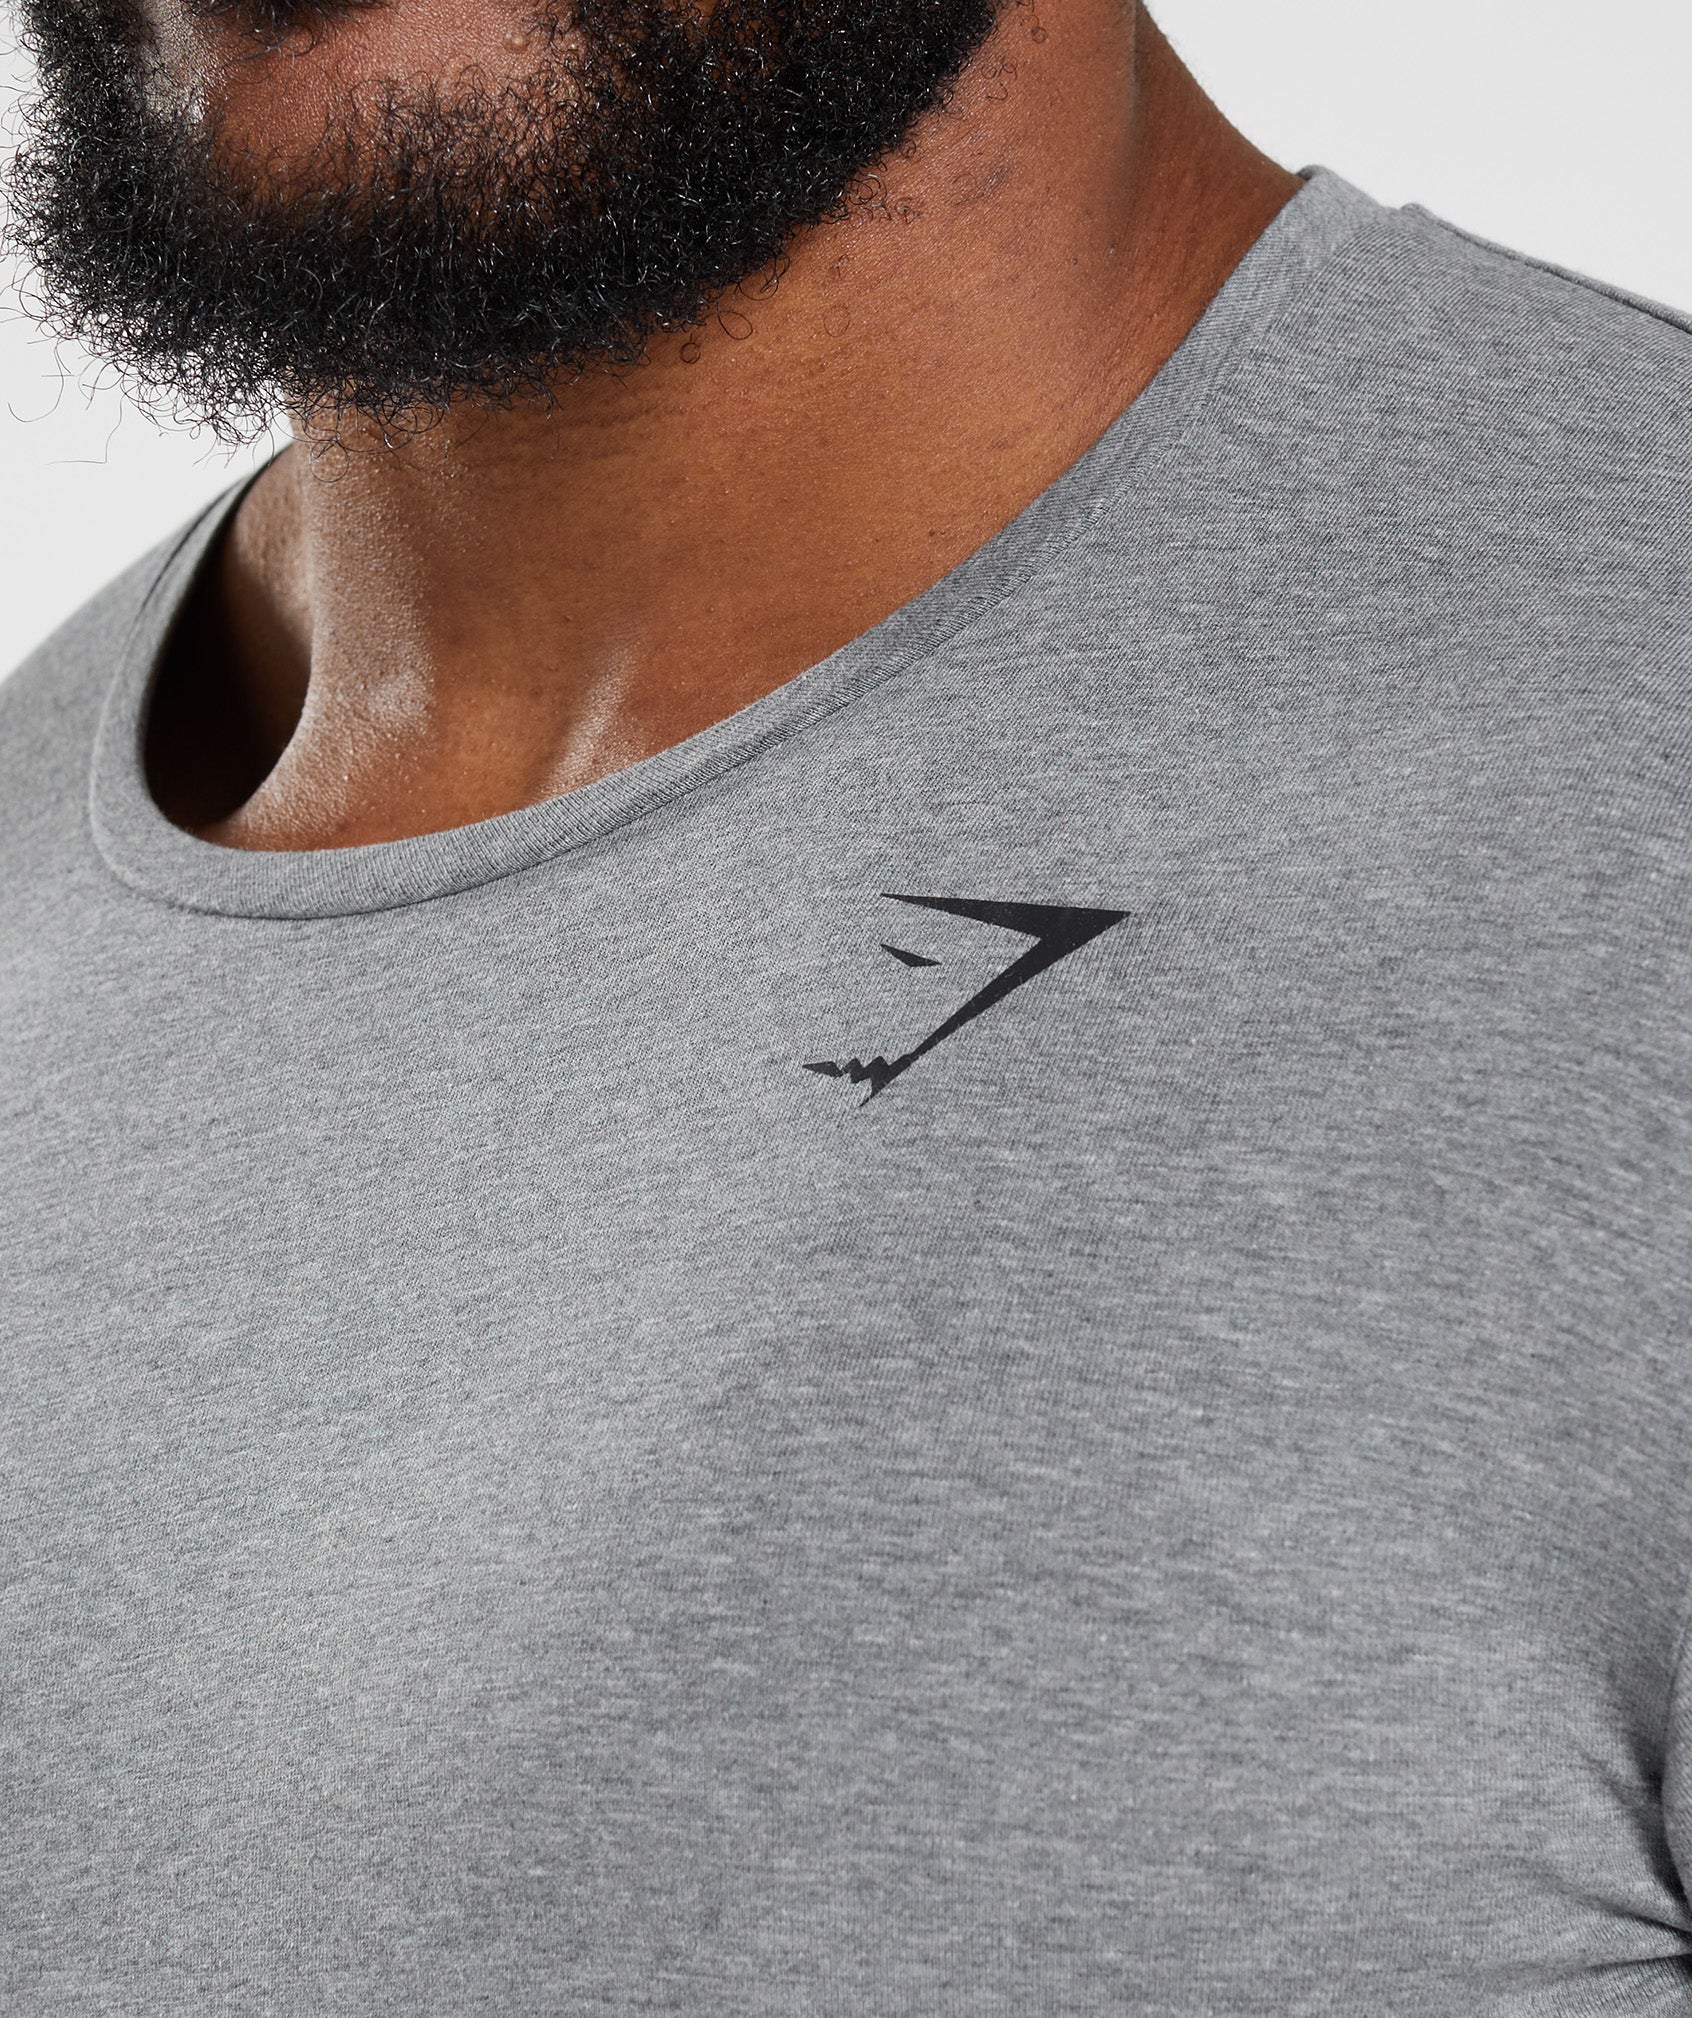 Essential T-Shirt in Charcoal Grey Marl - view 3